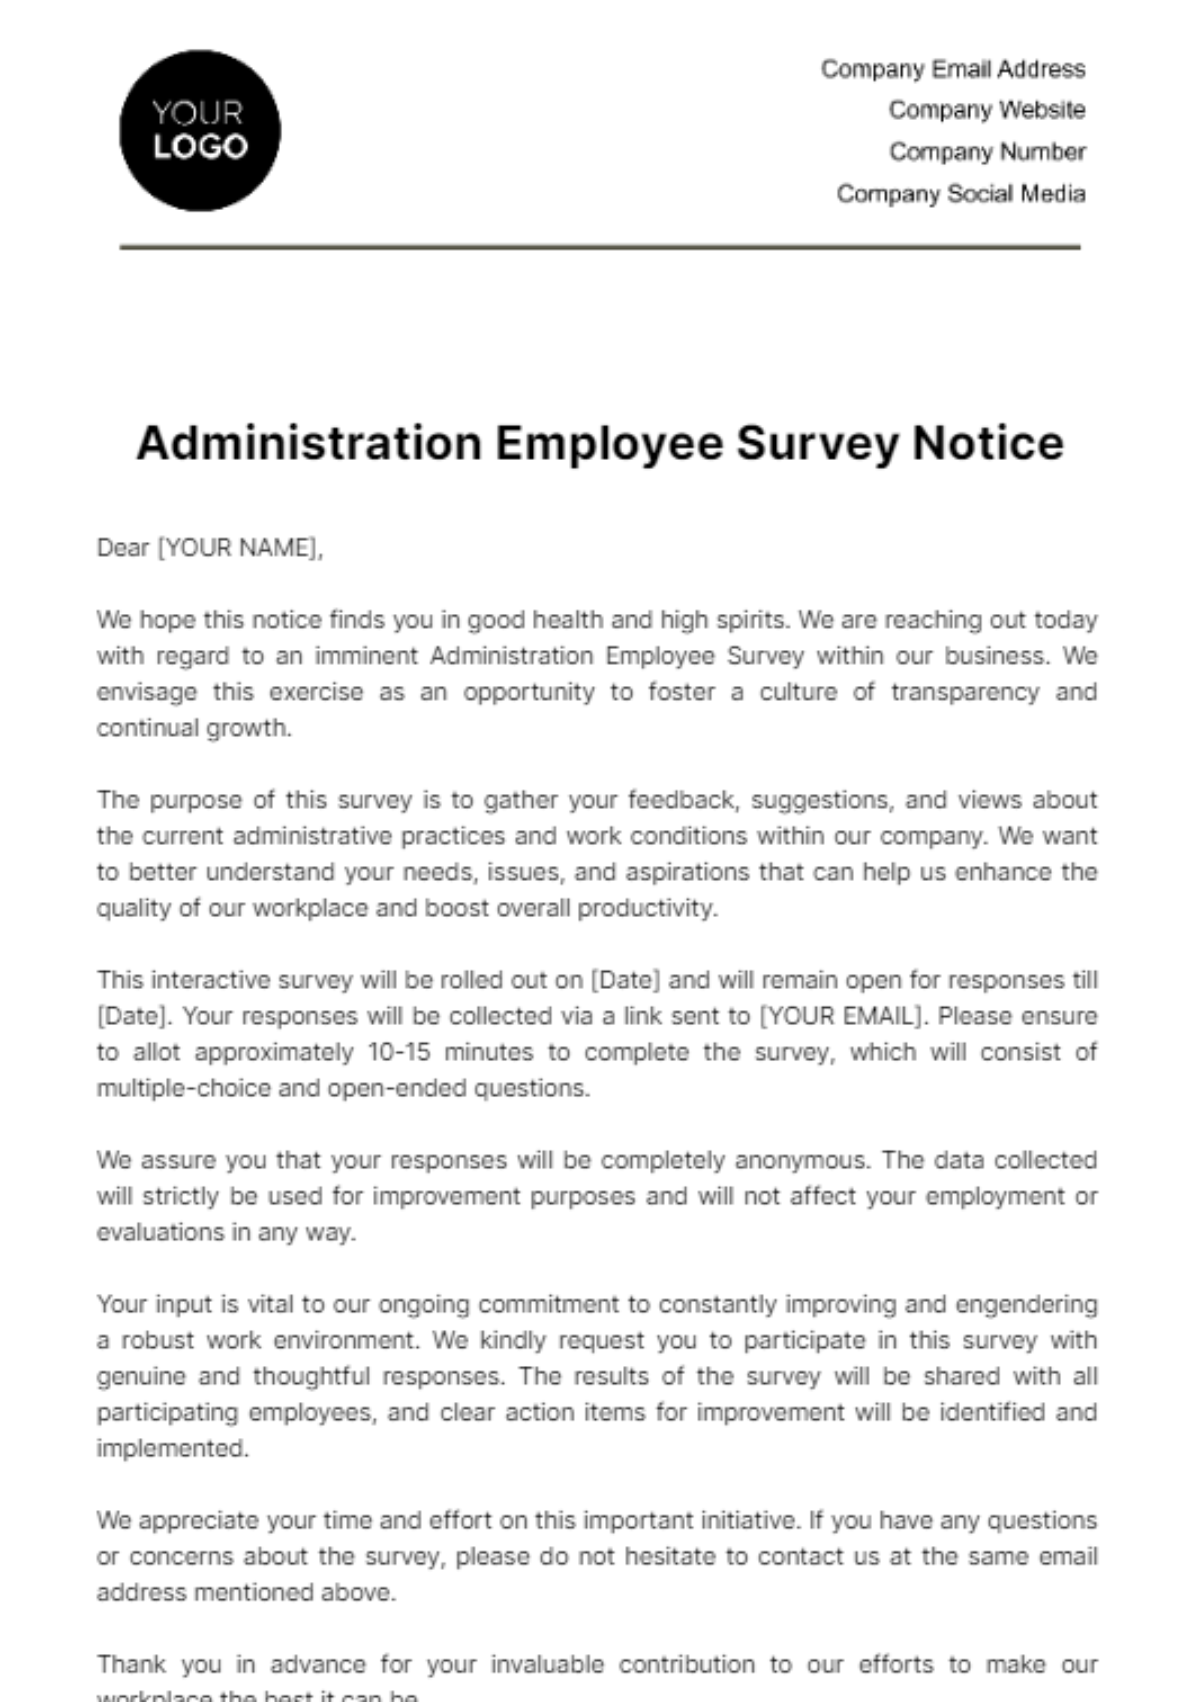 Administration Employee Survey Notice Template